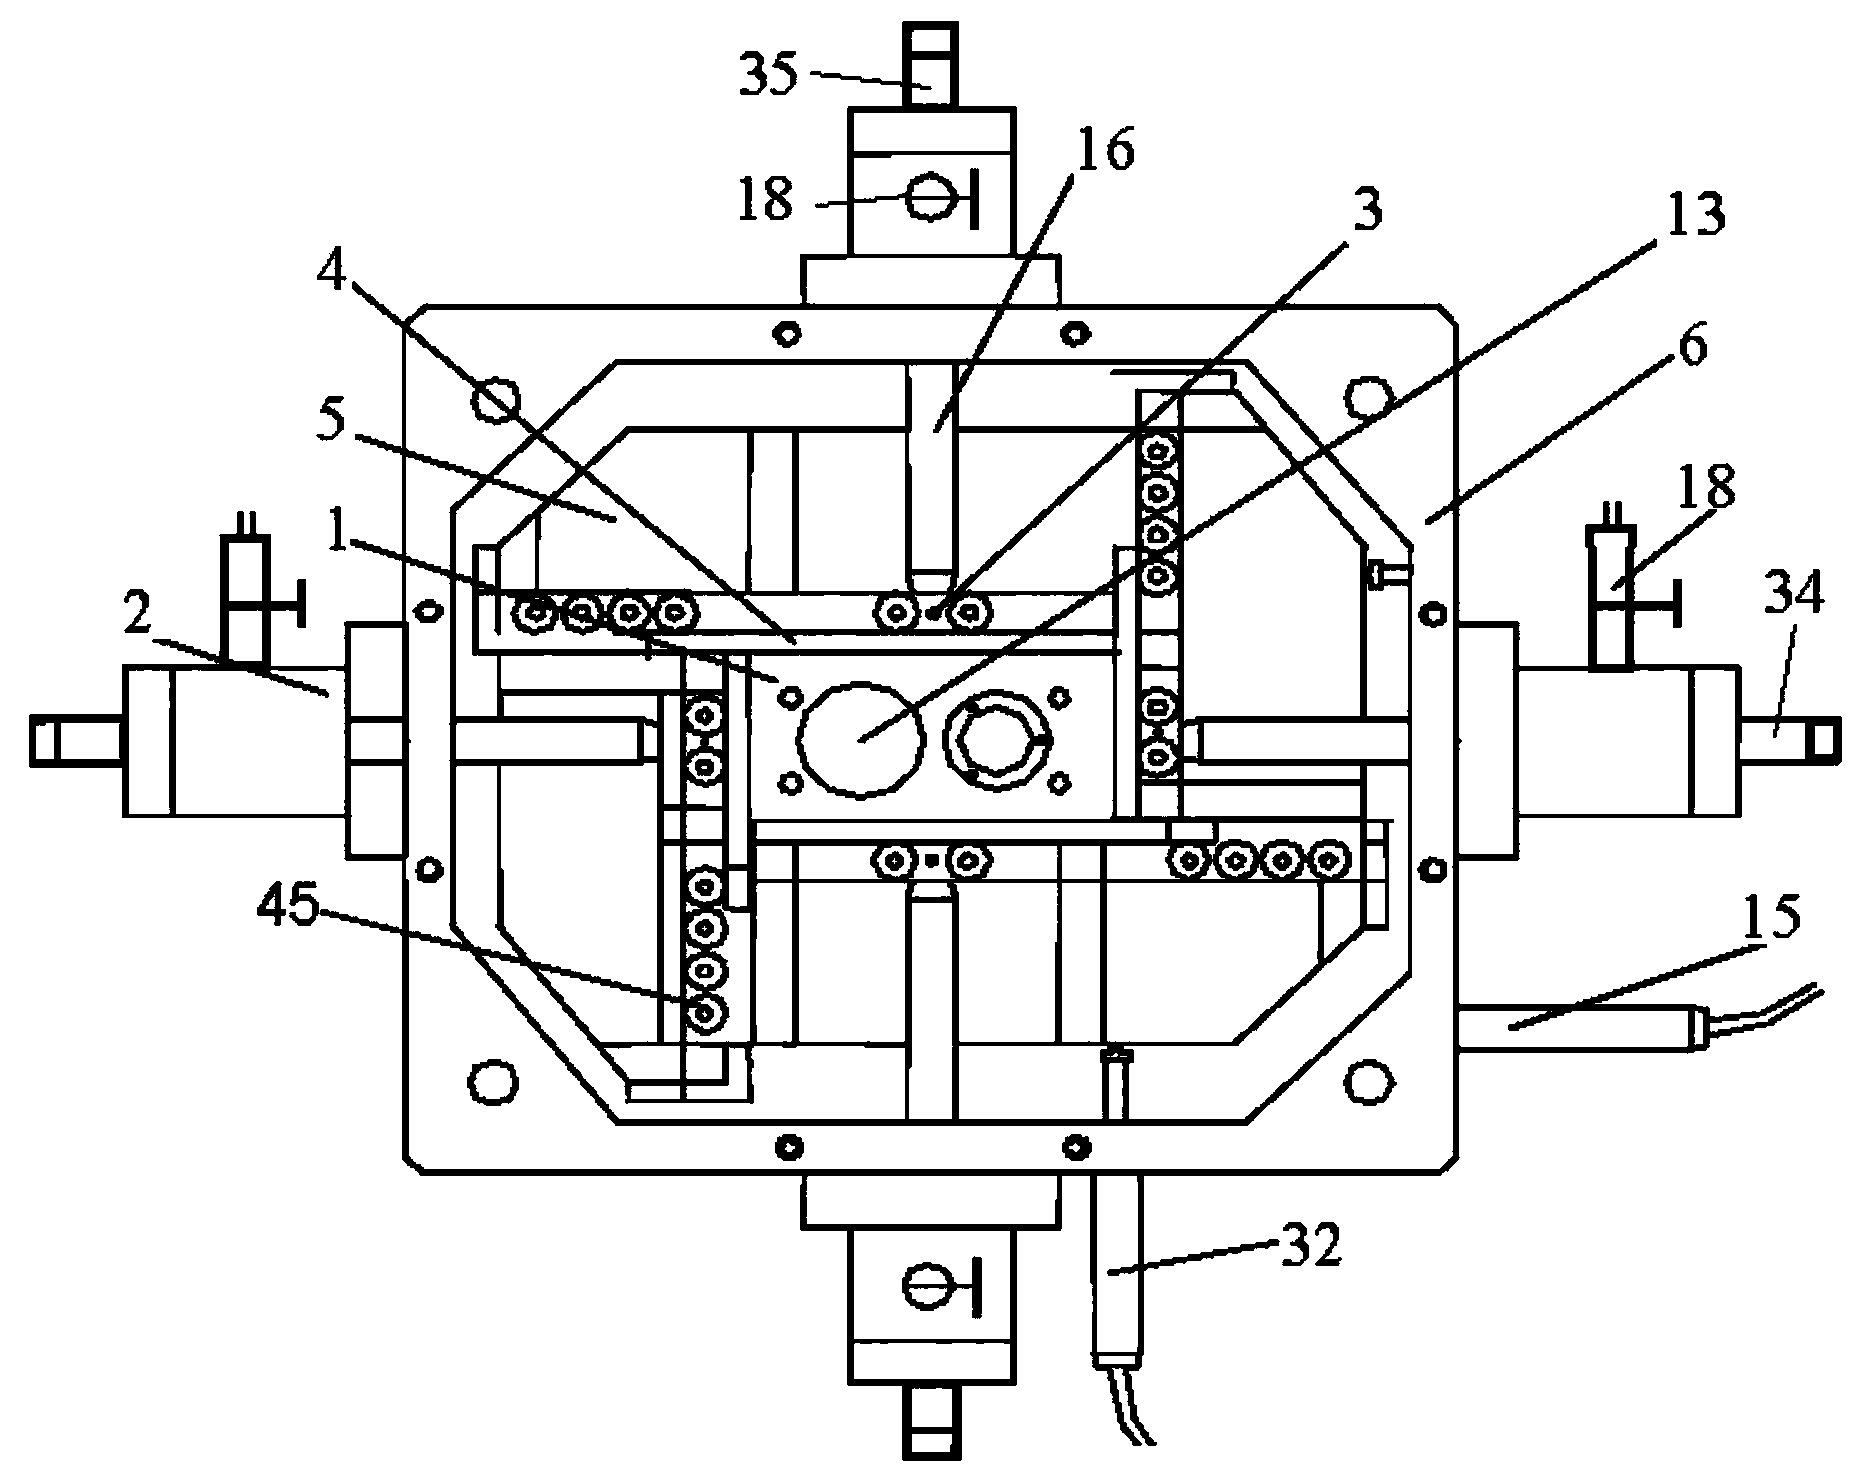 Horizontal geotechnical plane stress triaxial apparatus for pressure chamber structure